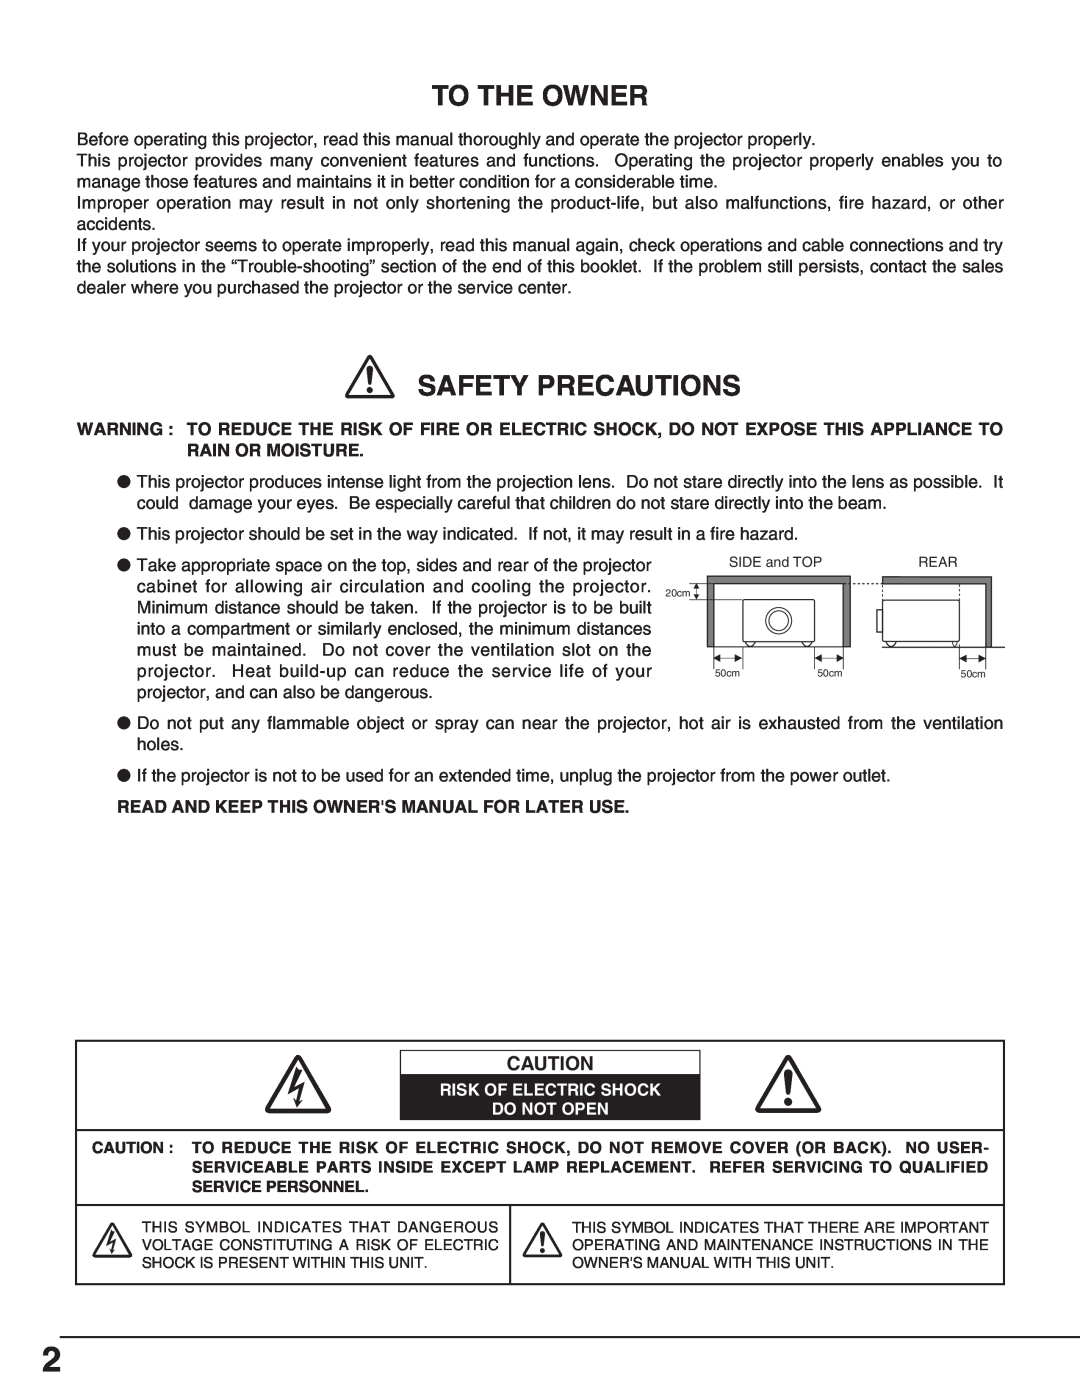 BOXLIGHT cp-305t manual To The Owner, Safety Precautions, Read And Keep This Owners Manual For Later Use 